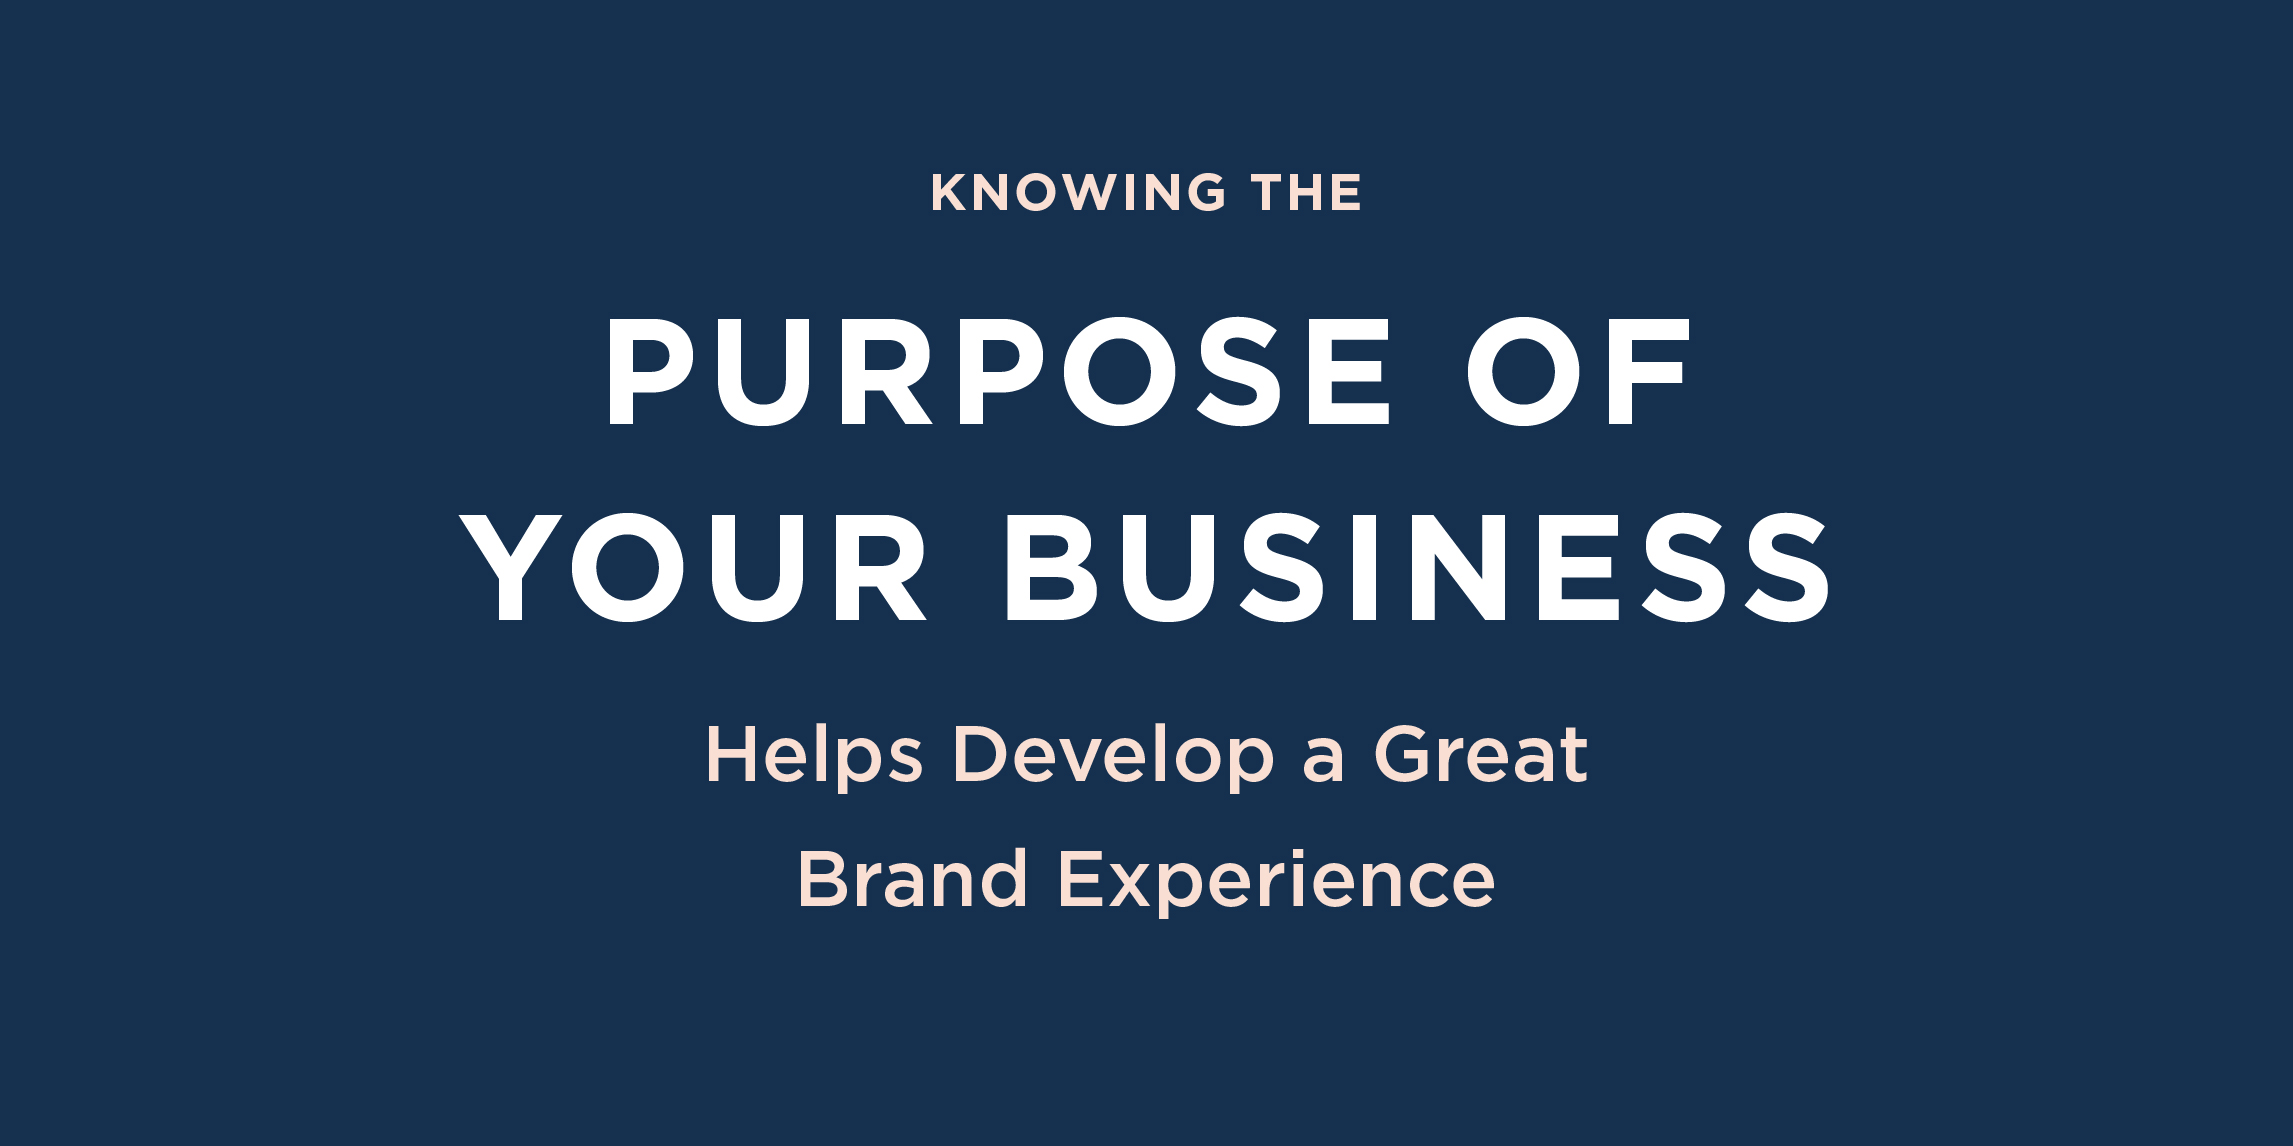 Knowing the purpose of your business helps develop a great brand experience.